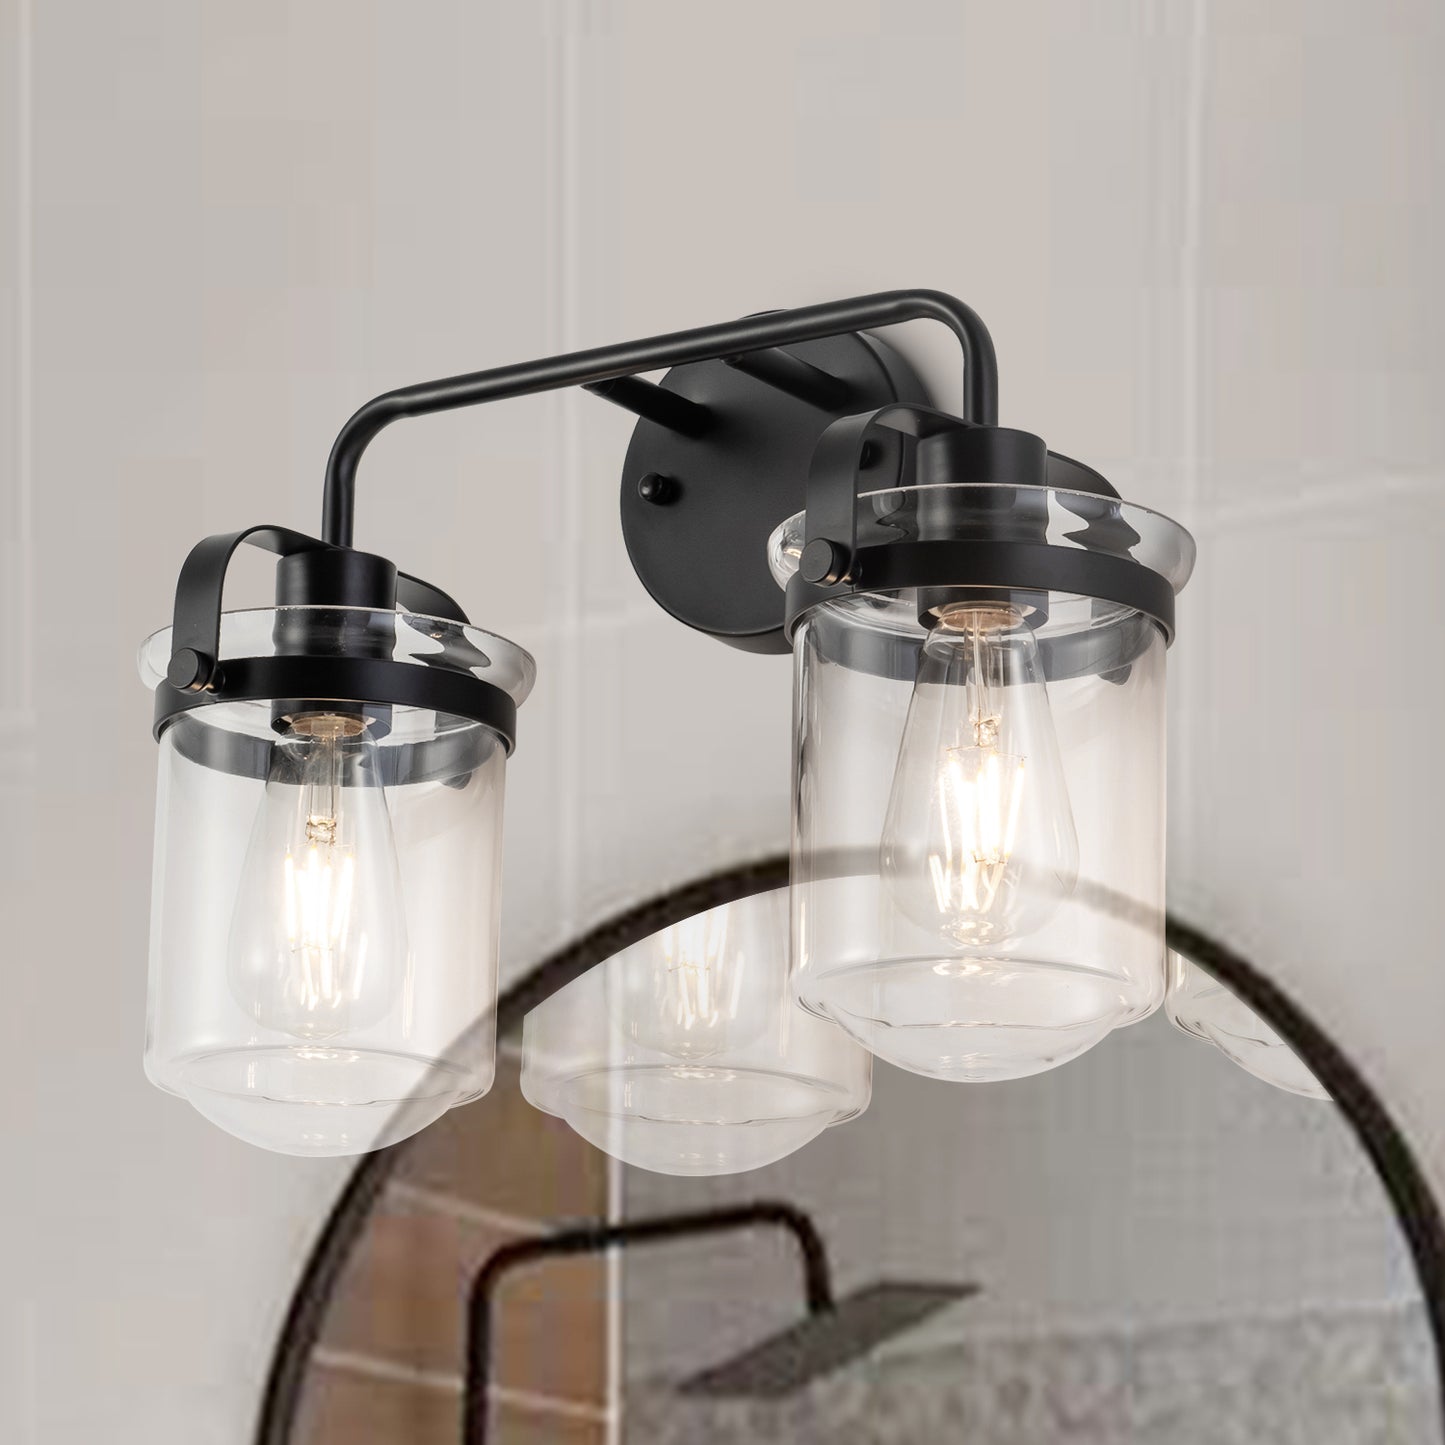 Wall Sconces Set of 2 with Clear Glass Shade, Modern Wall Sconce, Industrial Indoor Wall Light Fixture for Bathroom Living Room Bedroom Over Kitchen Sink, E26 Socket, Bulbs Not Included